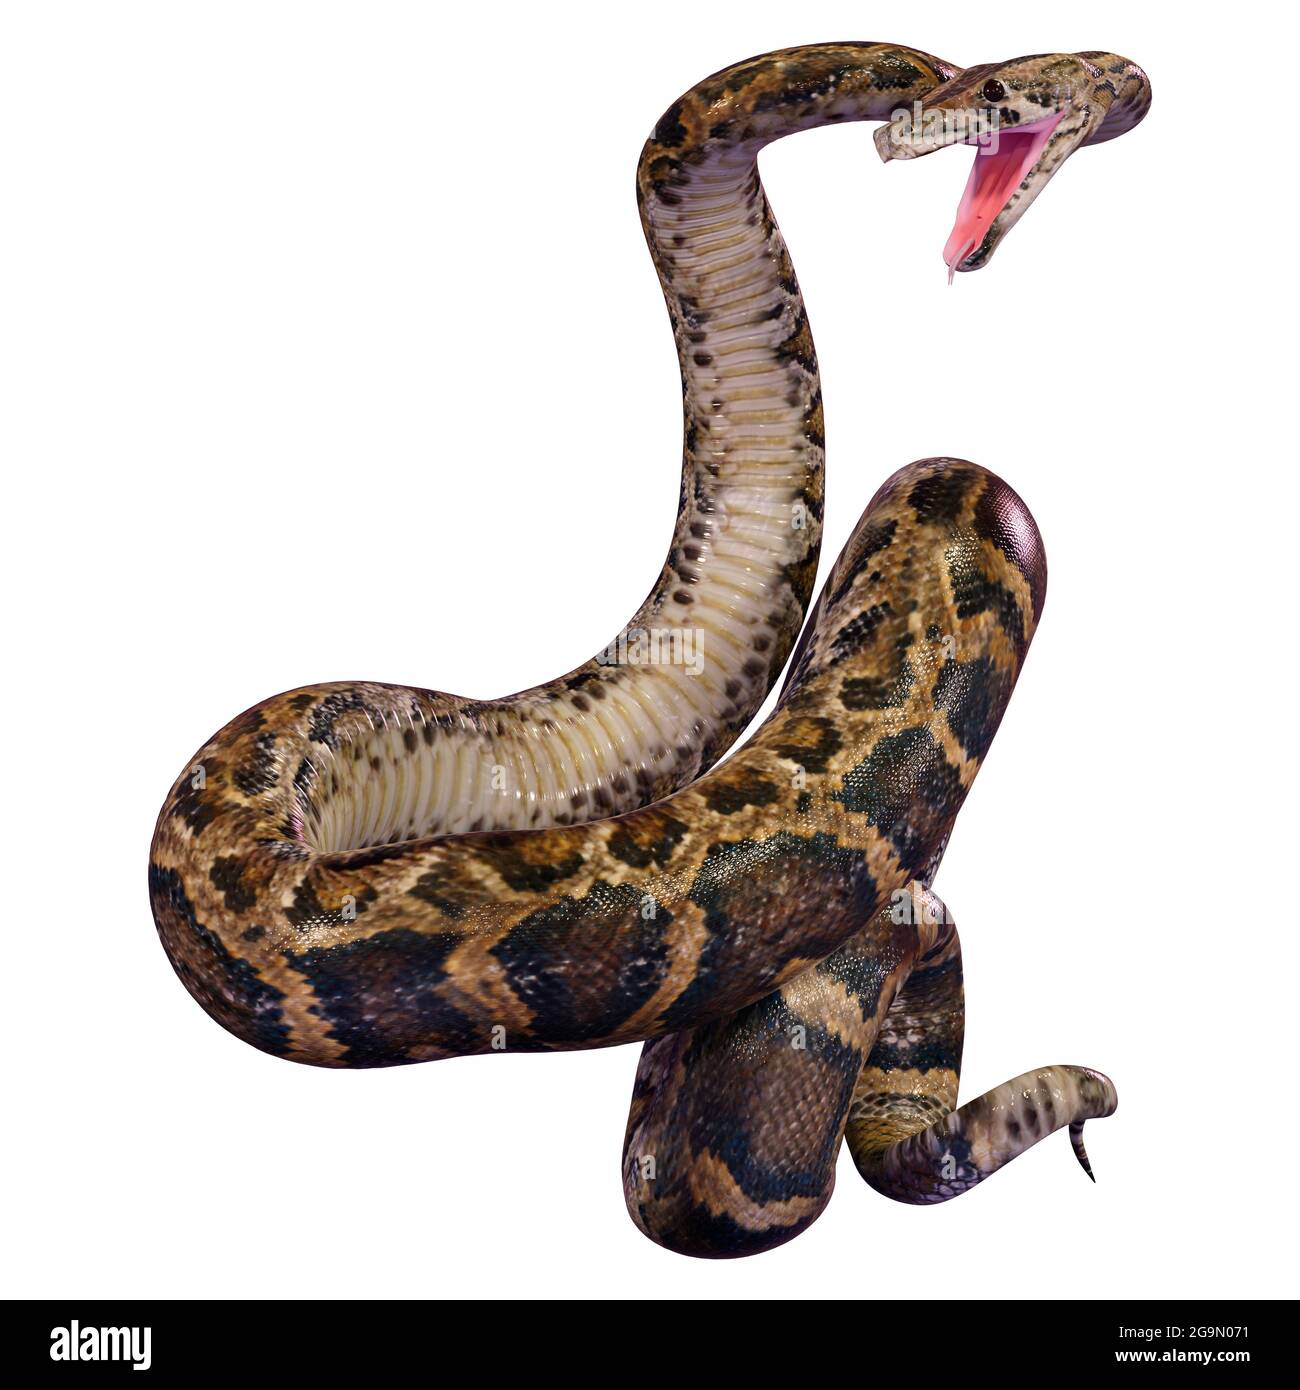 3D rendering of a Burmese python or Python bivittatus, one of the largest snakes in the world, isolated on white background Stock Photo